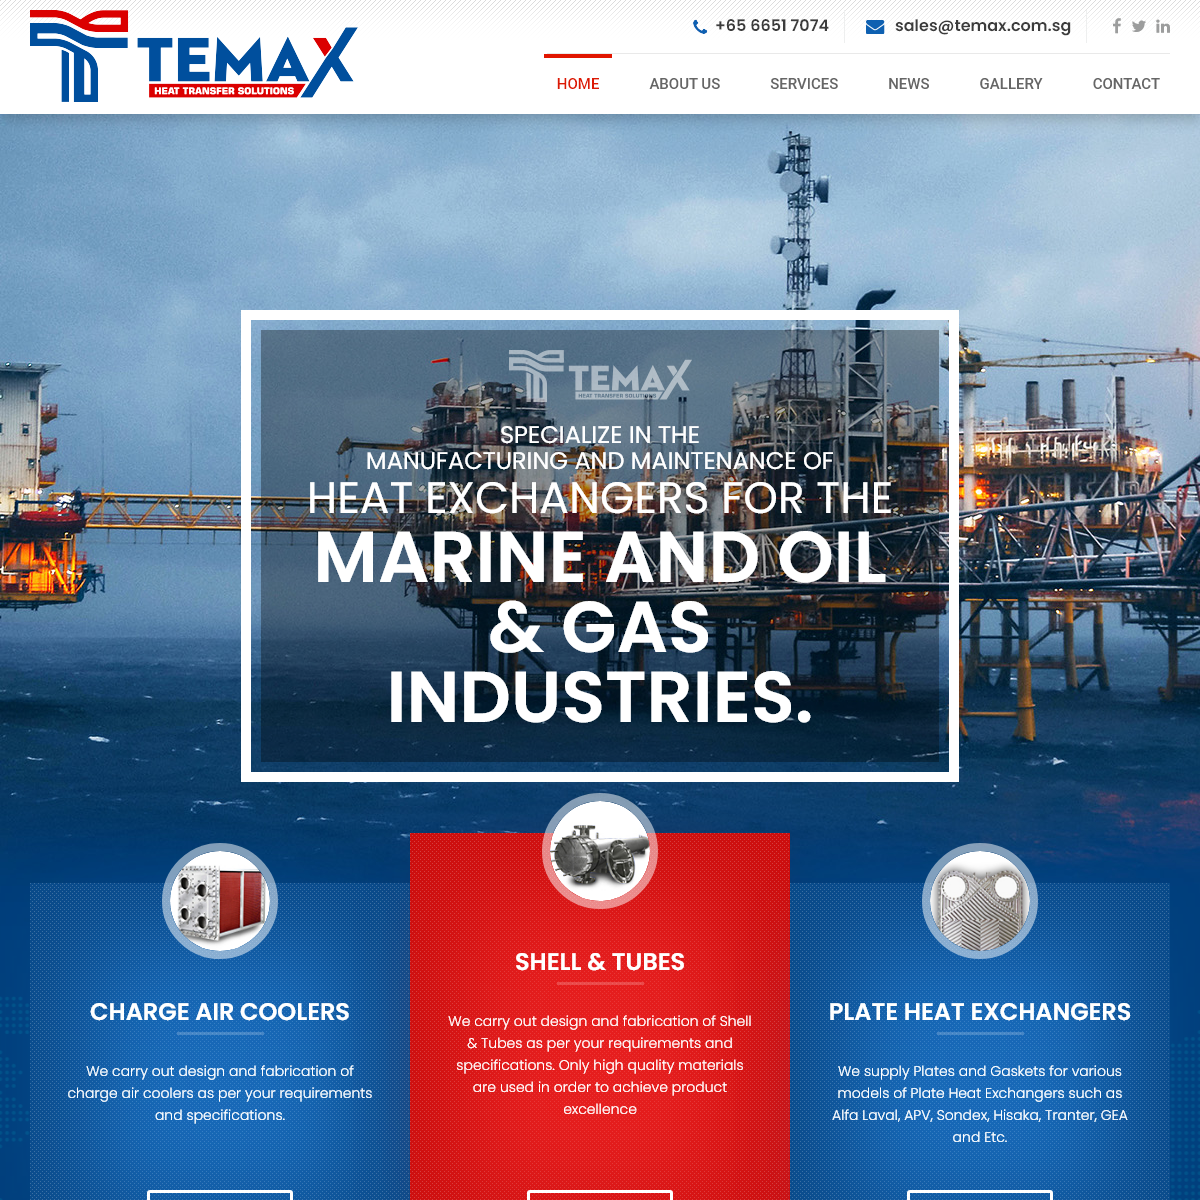 A complete backup of temax.com.sg